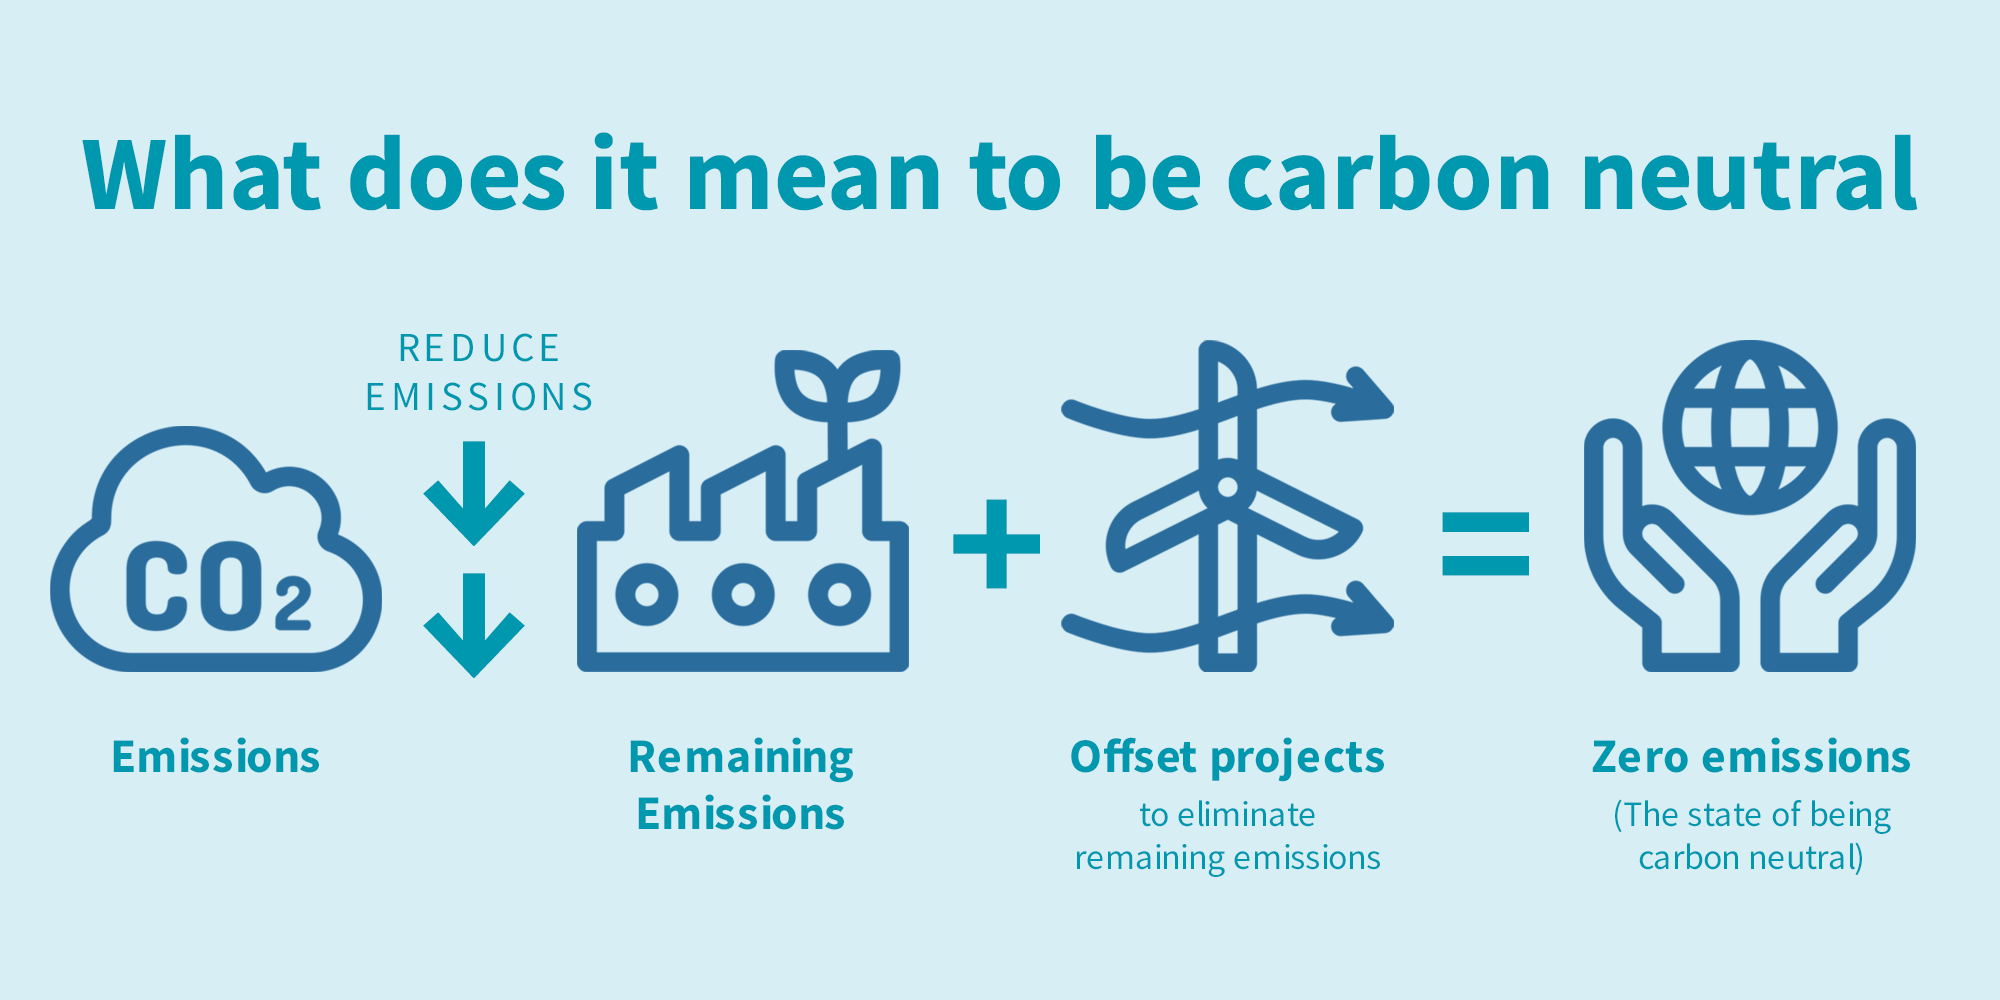 The process of carbon neutrality